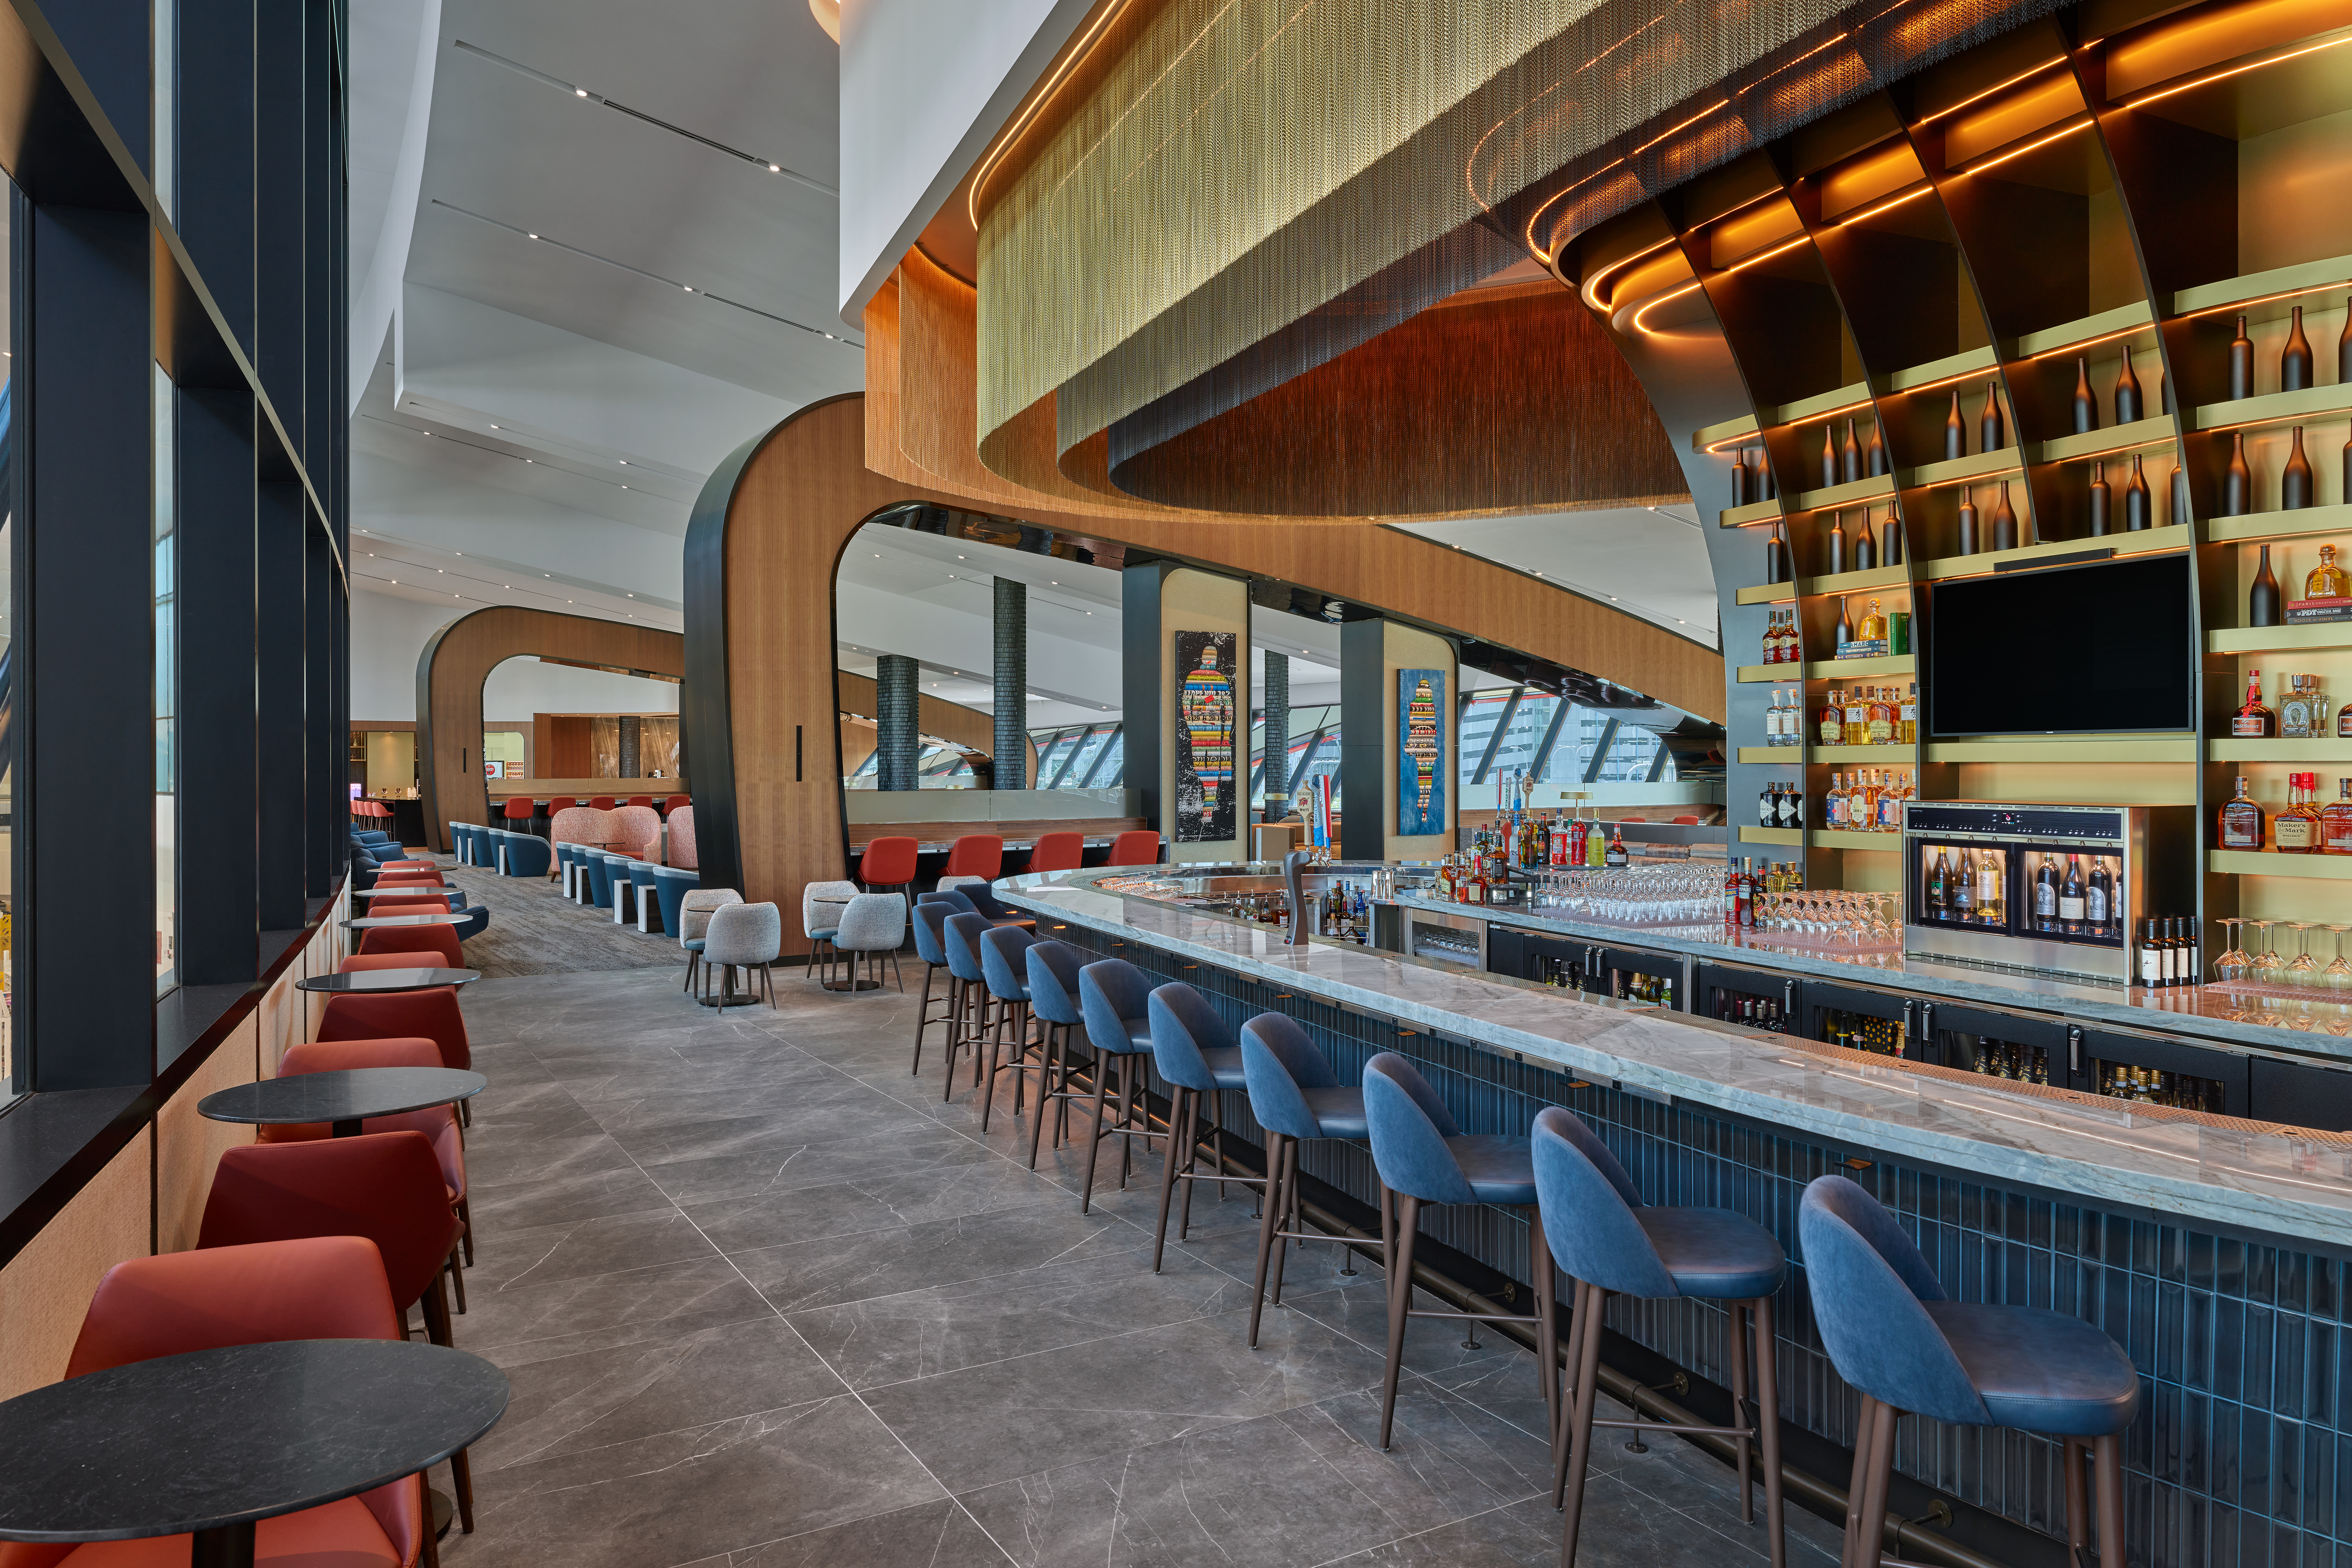 Perhaps the most eye-catching element of Delta's newest Sky Club at Boston-Logan Airport is the premium bar, which features a layered, champagne-toned mesh ceiling overhang and a dramatic backlit beverage display. 